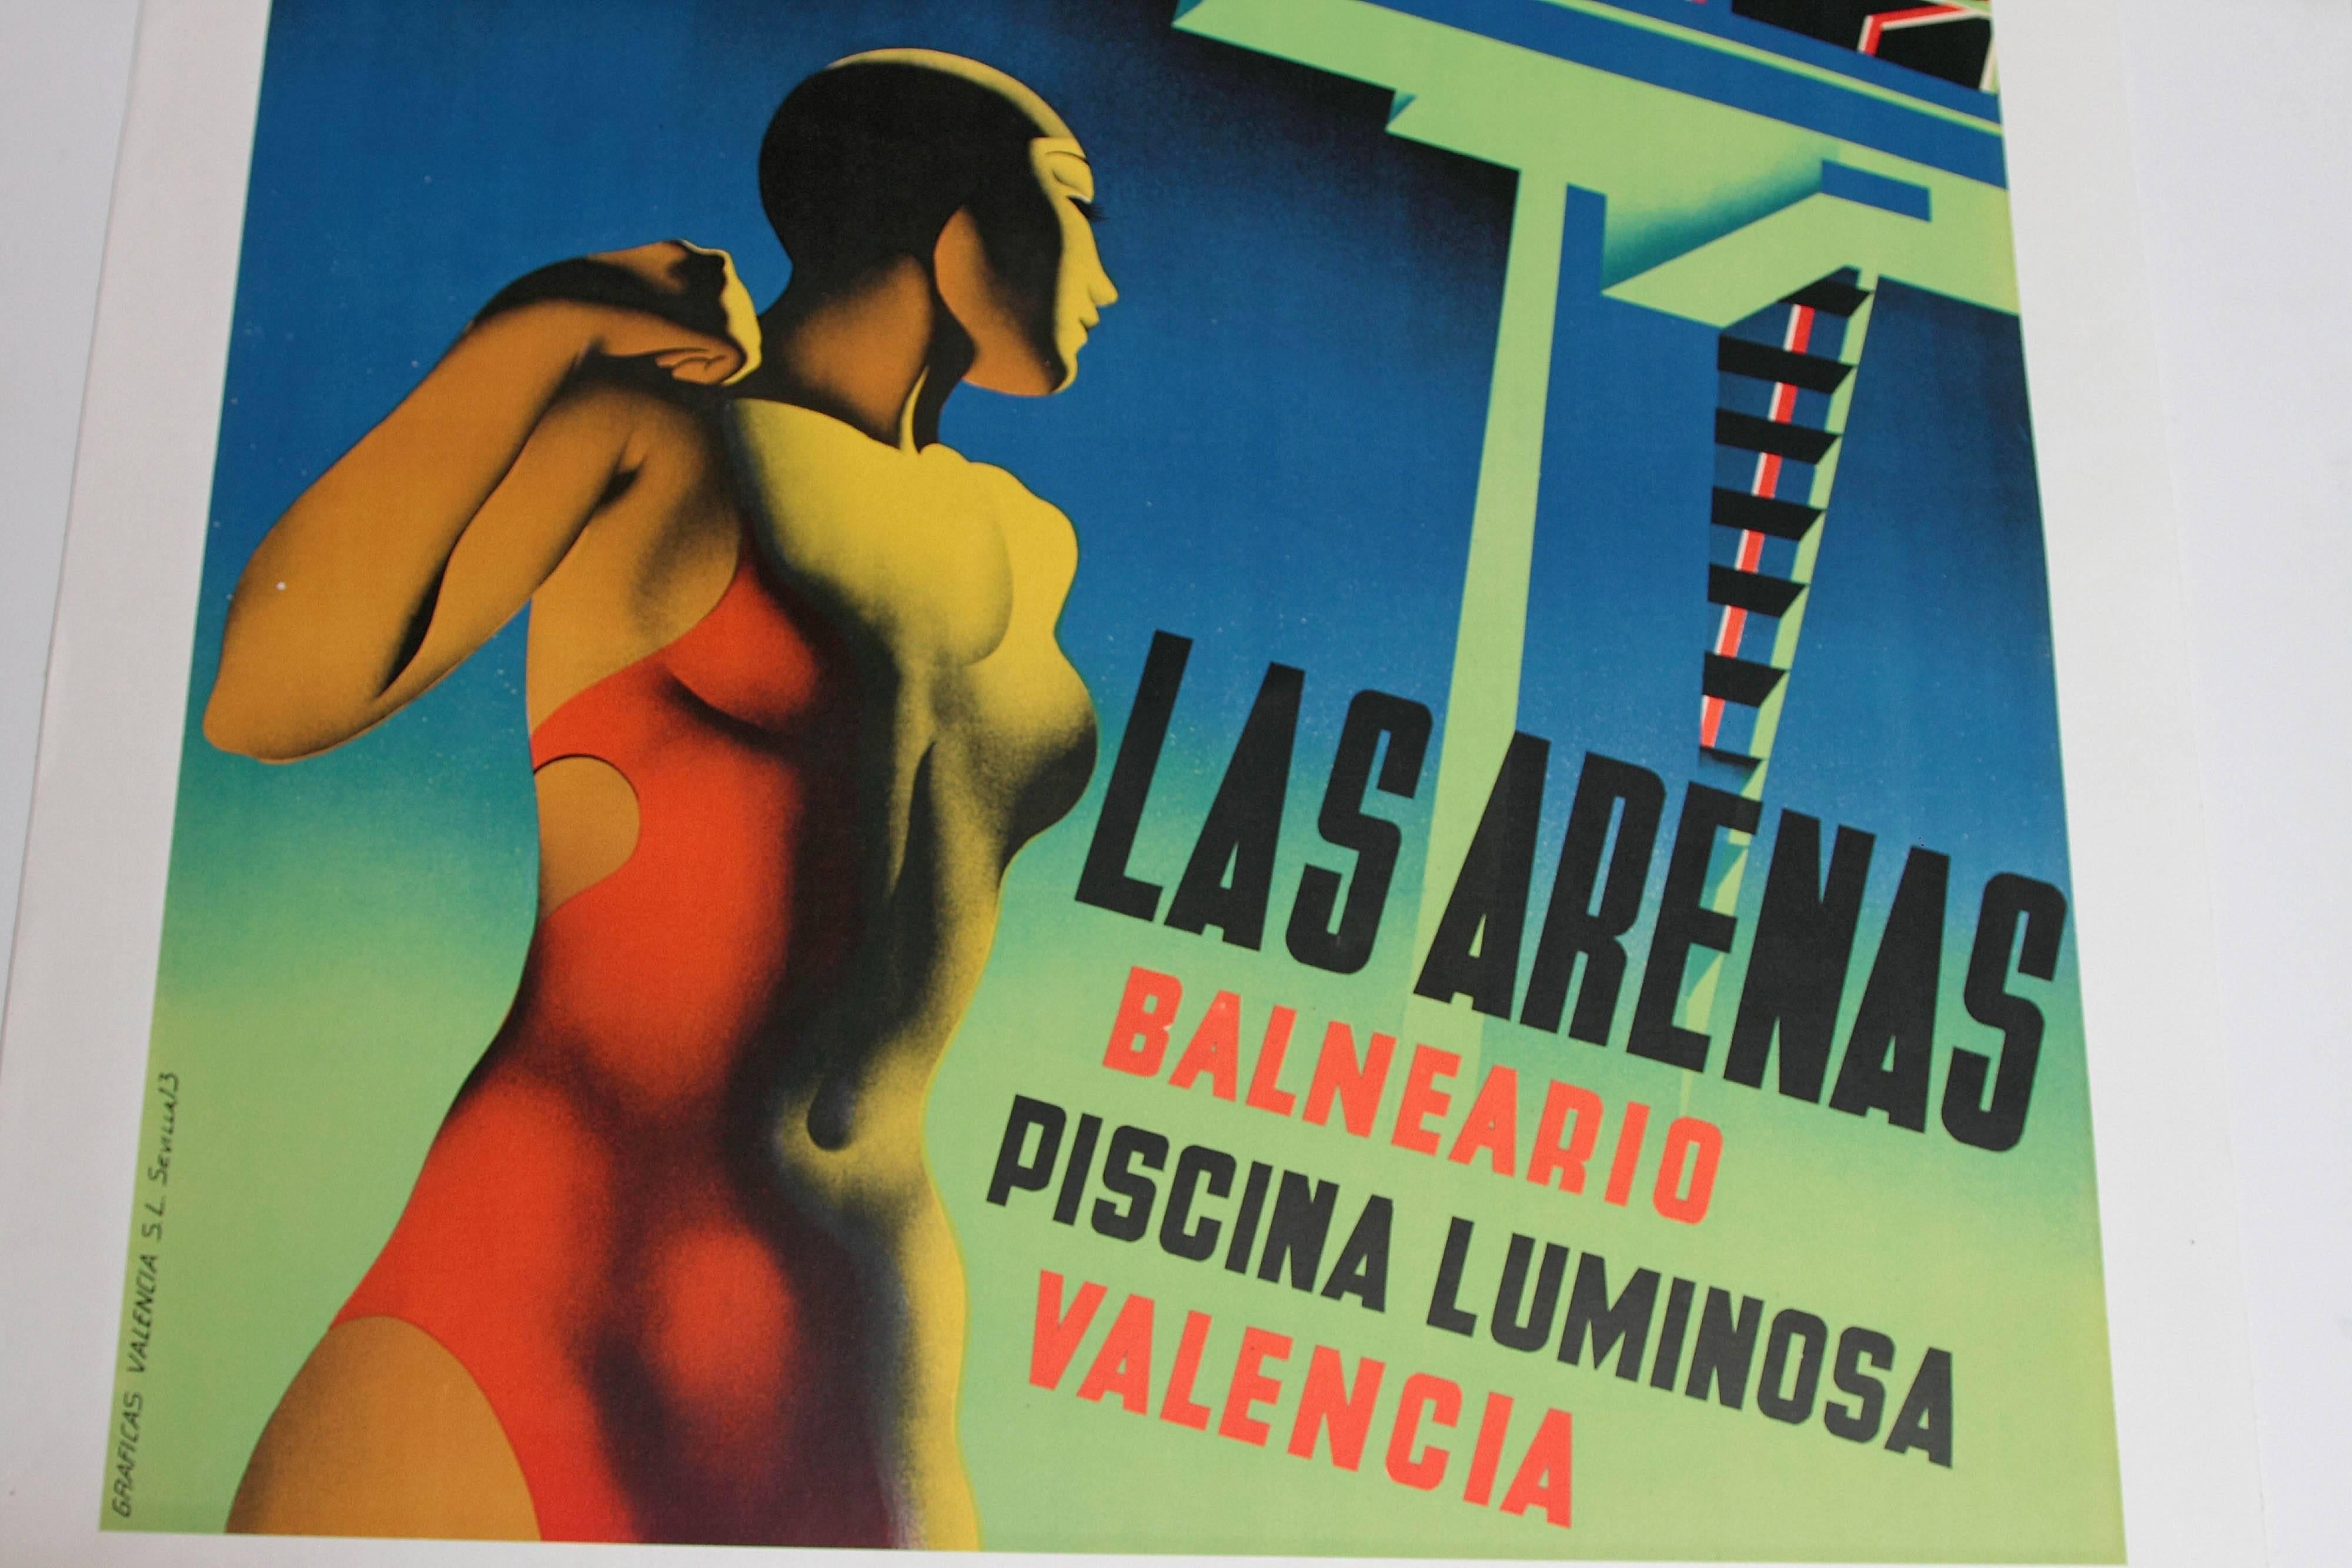 Renau executed movie and travel posters in Spain, in a style reminiscent of the Soviet avant-garde.
This Classic example from 1932 for the swimming pool at the über-posh Hotel Balneario Las Arenas Resort in Valencia.
Fully signed, excellent